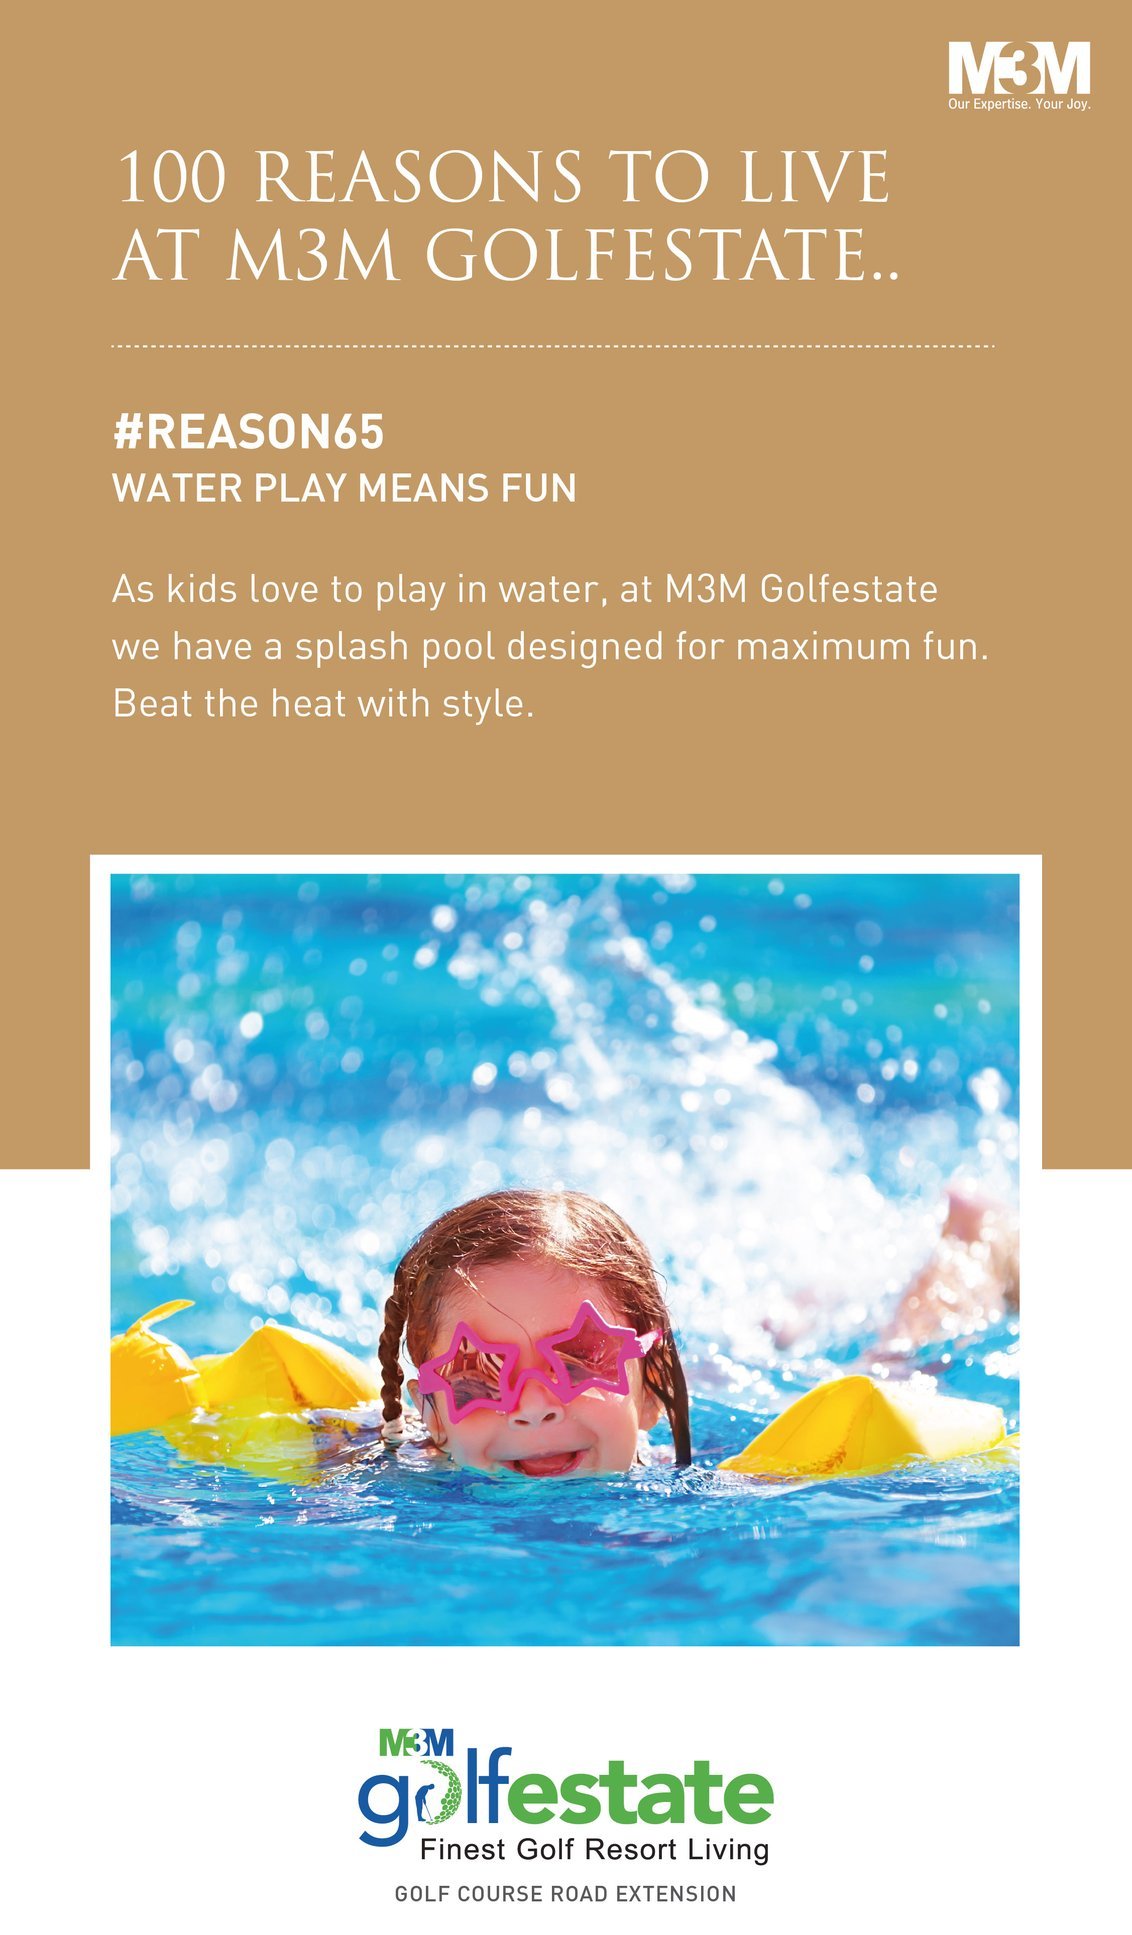 Dive into the Splash Pool at M3M Golf Estate and beat the heat with style